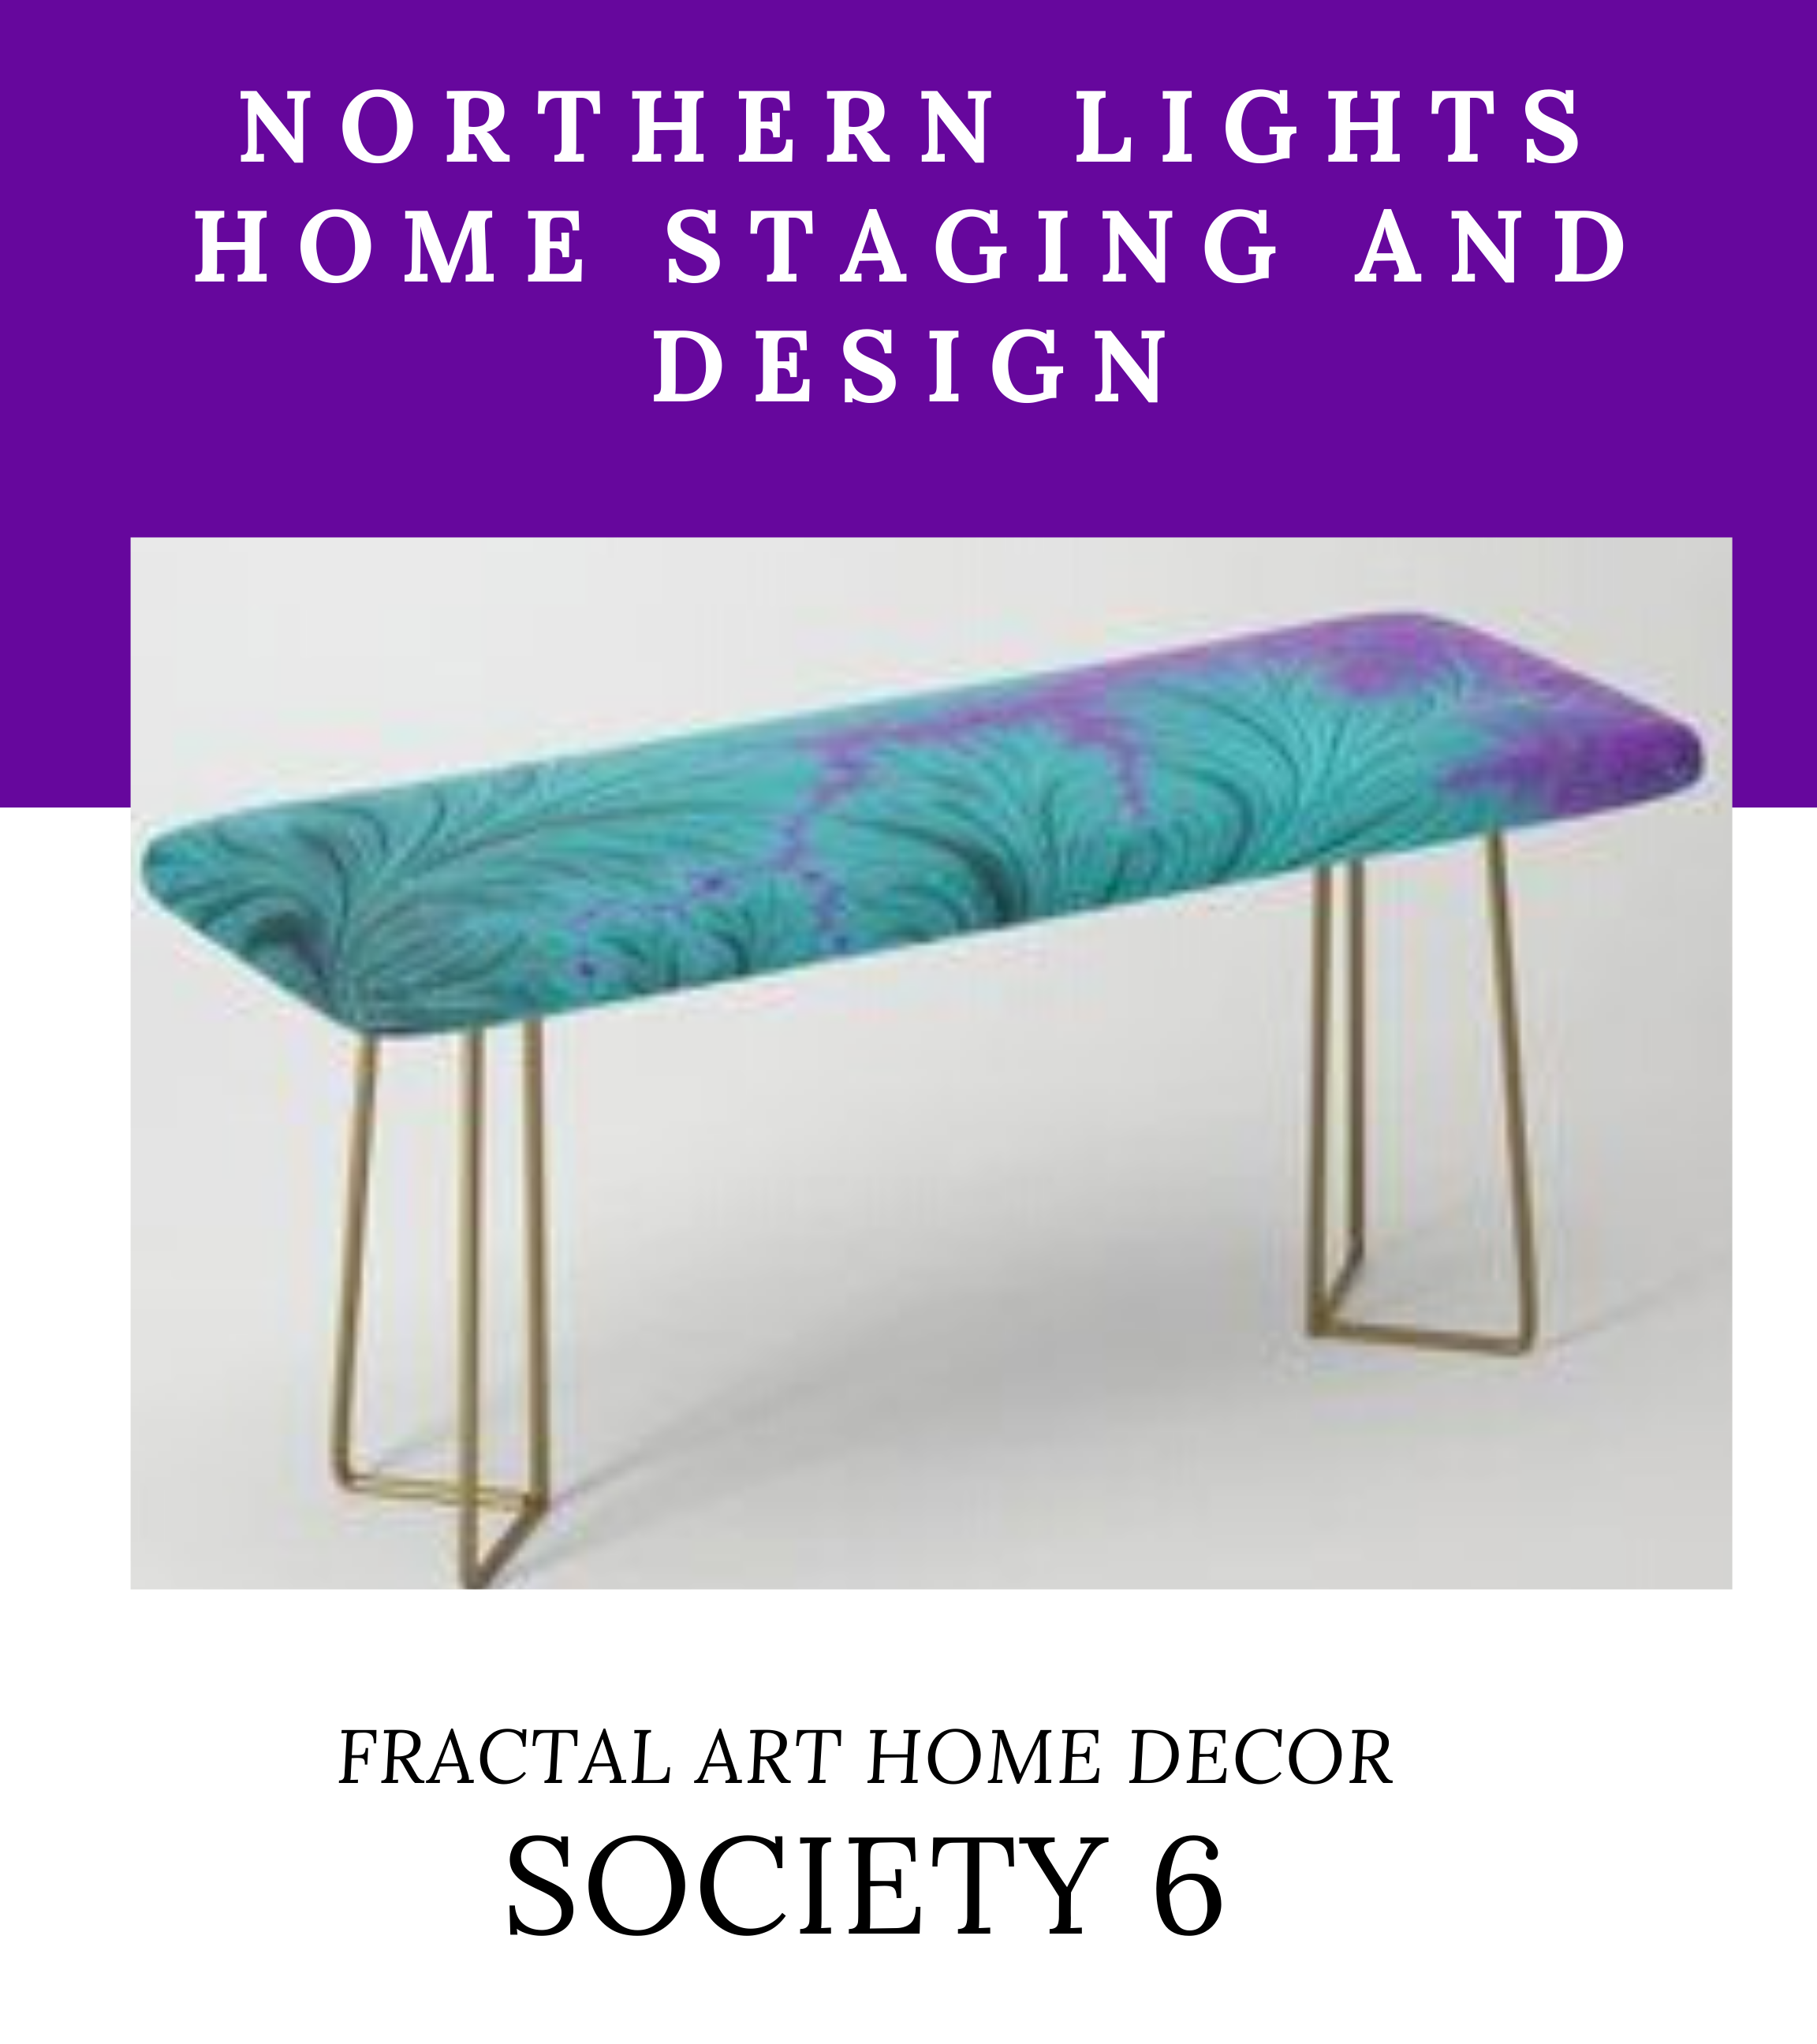 Northern Lights Home Staging and Design on Society 6- Fractal Art Home Decor